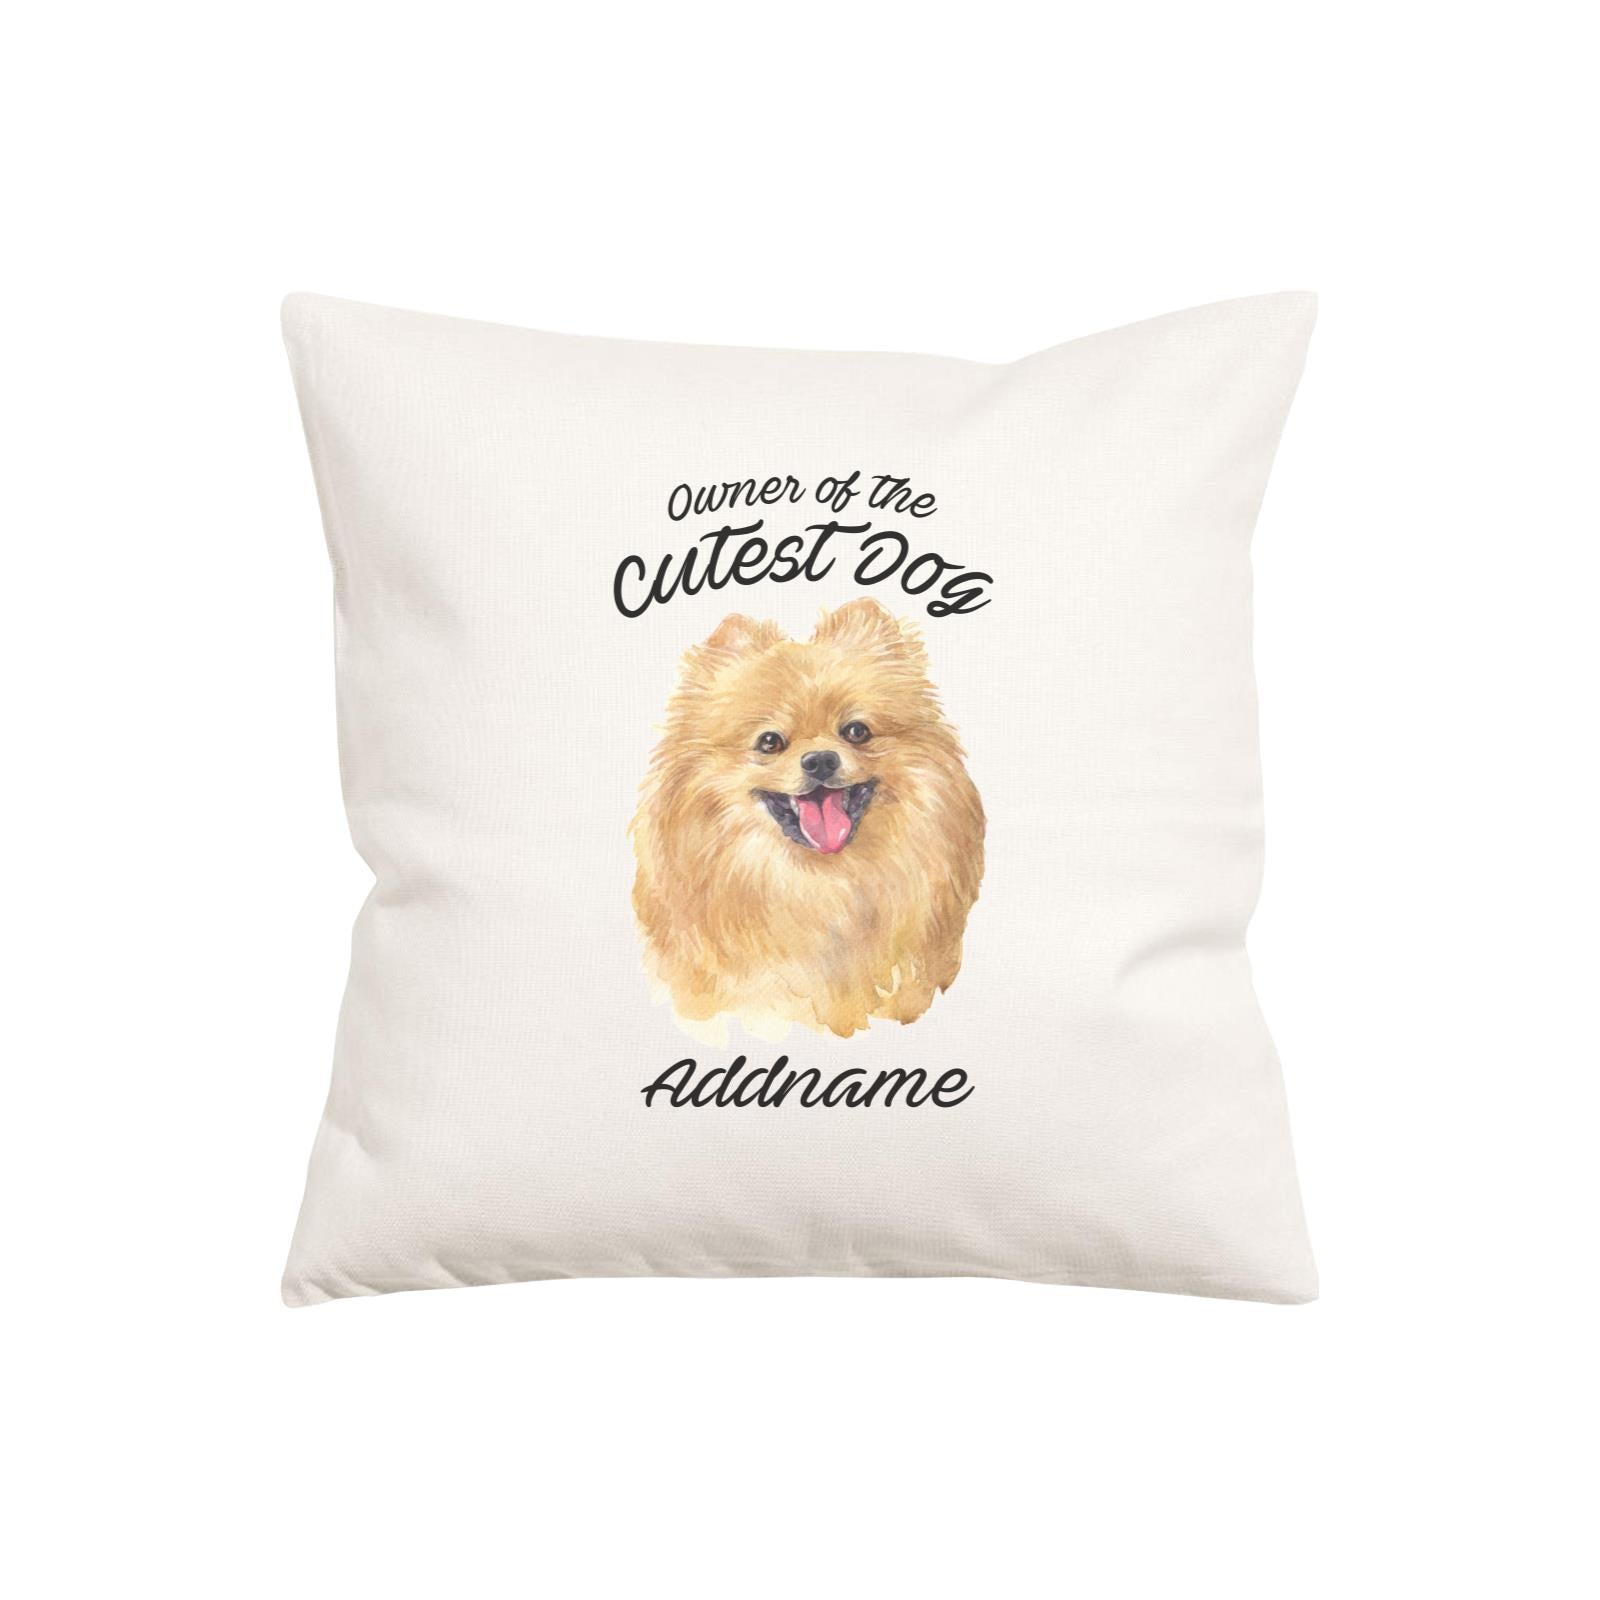 Watercolor Dog Owner Of The Cutest Dog Pomeranian Addname Pillow Cushion